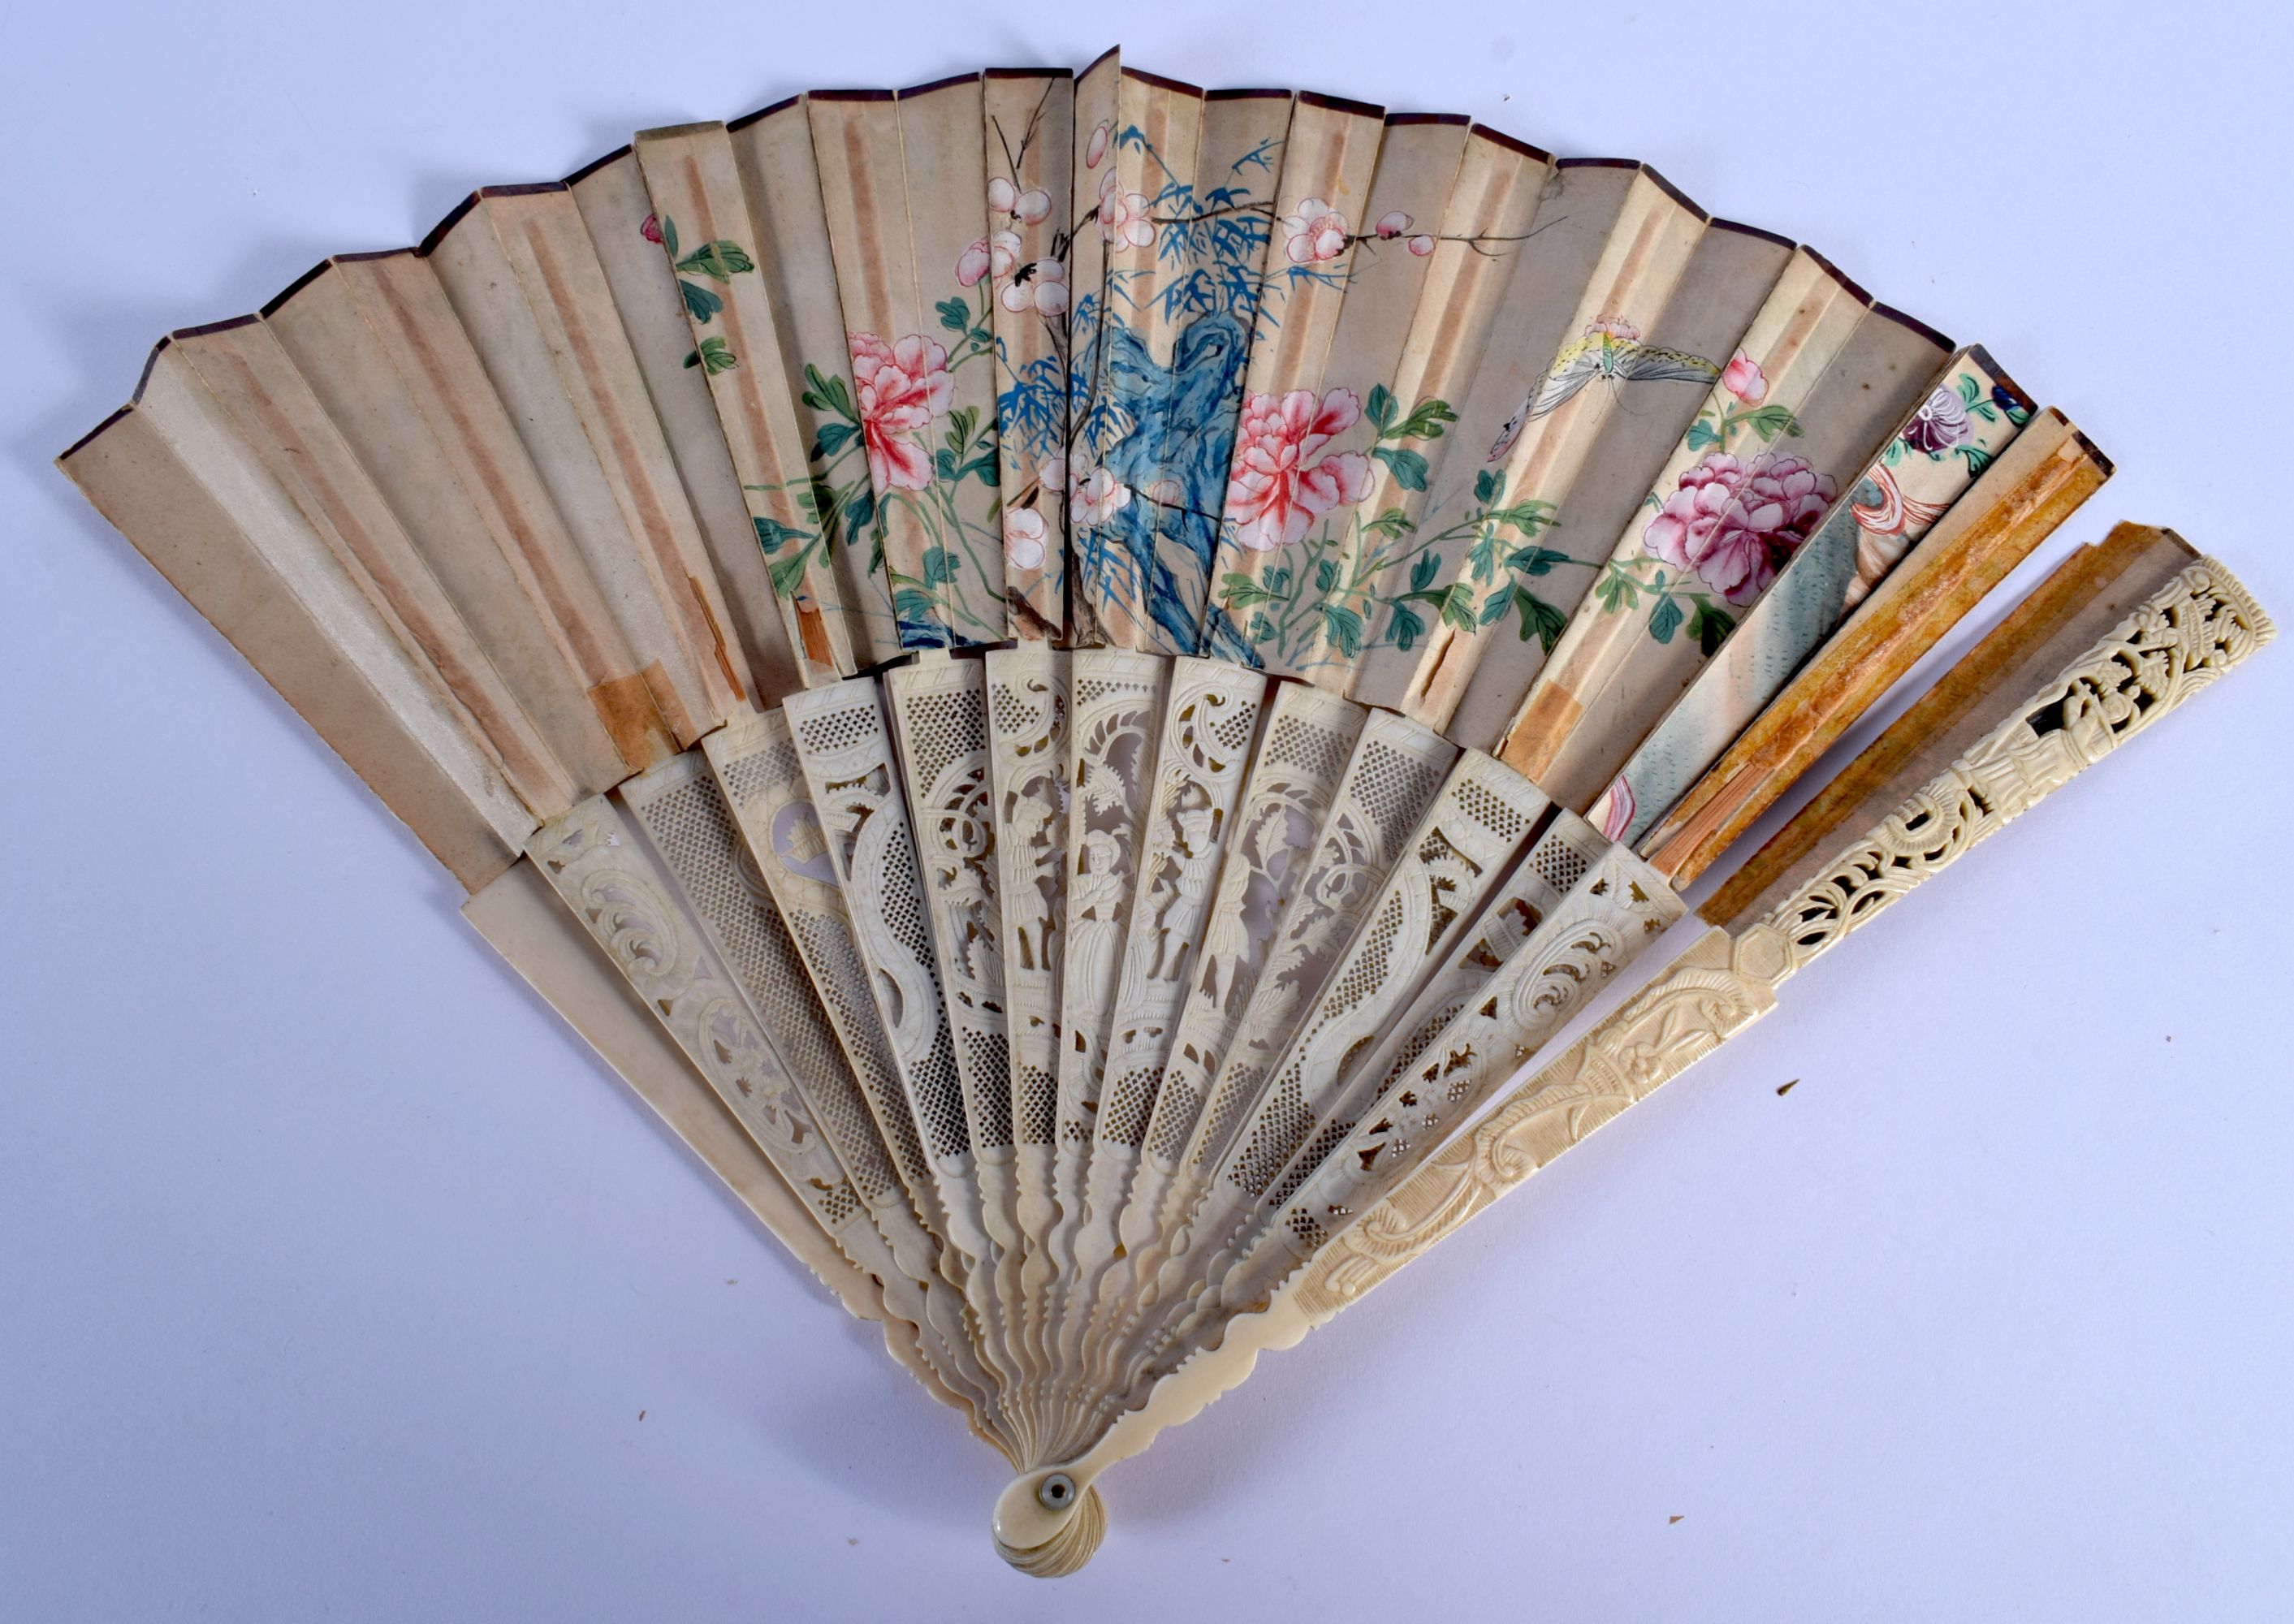 A LATE 18TH CENTURY EUROPEAN CHINOSERIE PAPER LEAF FAN decorated with flowers. 50 cm wide extended. - Image 4 of 5